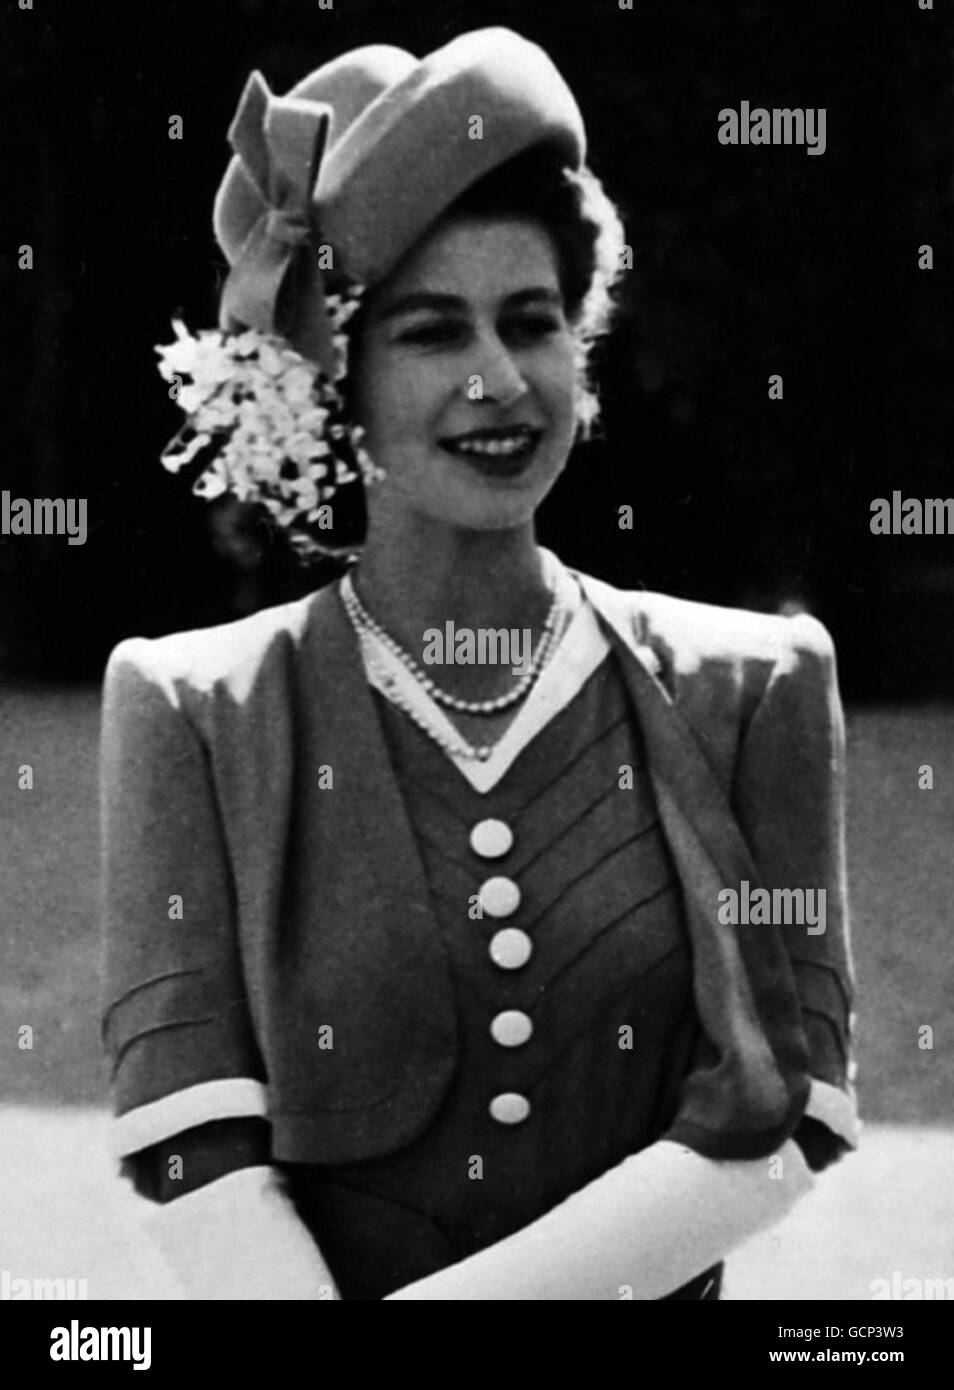 Princess Elizabeth at Drumhead service H.R.H Princess Elizabeth, Colonel of the Grenadier Guards, attended a drumhead service outside the Guards Chapel at Wellington Barracks. Afterwards the princess took the salute at Buckingham Palace when members of the Grenadier Guards commandes Association marched past. Picture shows: Princess Elizabeth wore this charming summer ensemble for the service. The frock, in mustard-coloured light woollen material, has a concertinapleated skirt and short bolero jacket. The felt tilted hat is decorated with lilies of the valley and the dress is edged in white Stock Photo